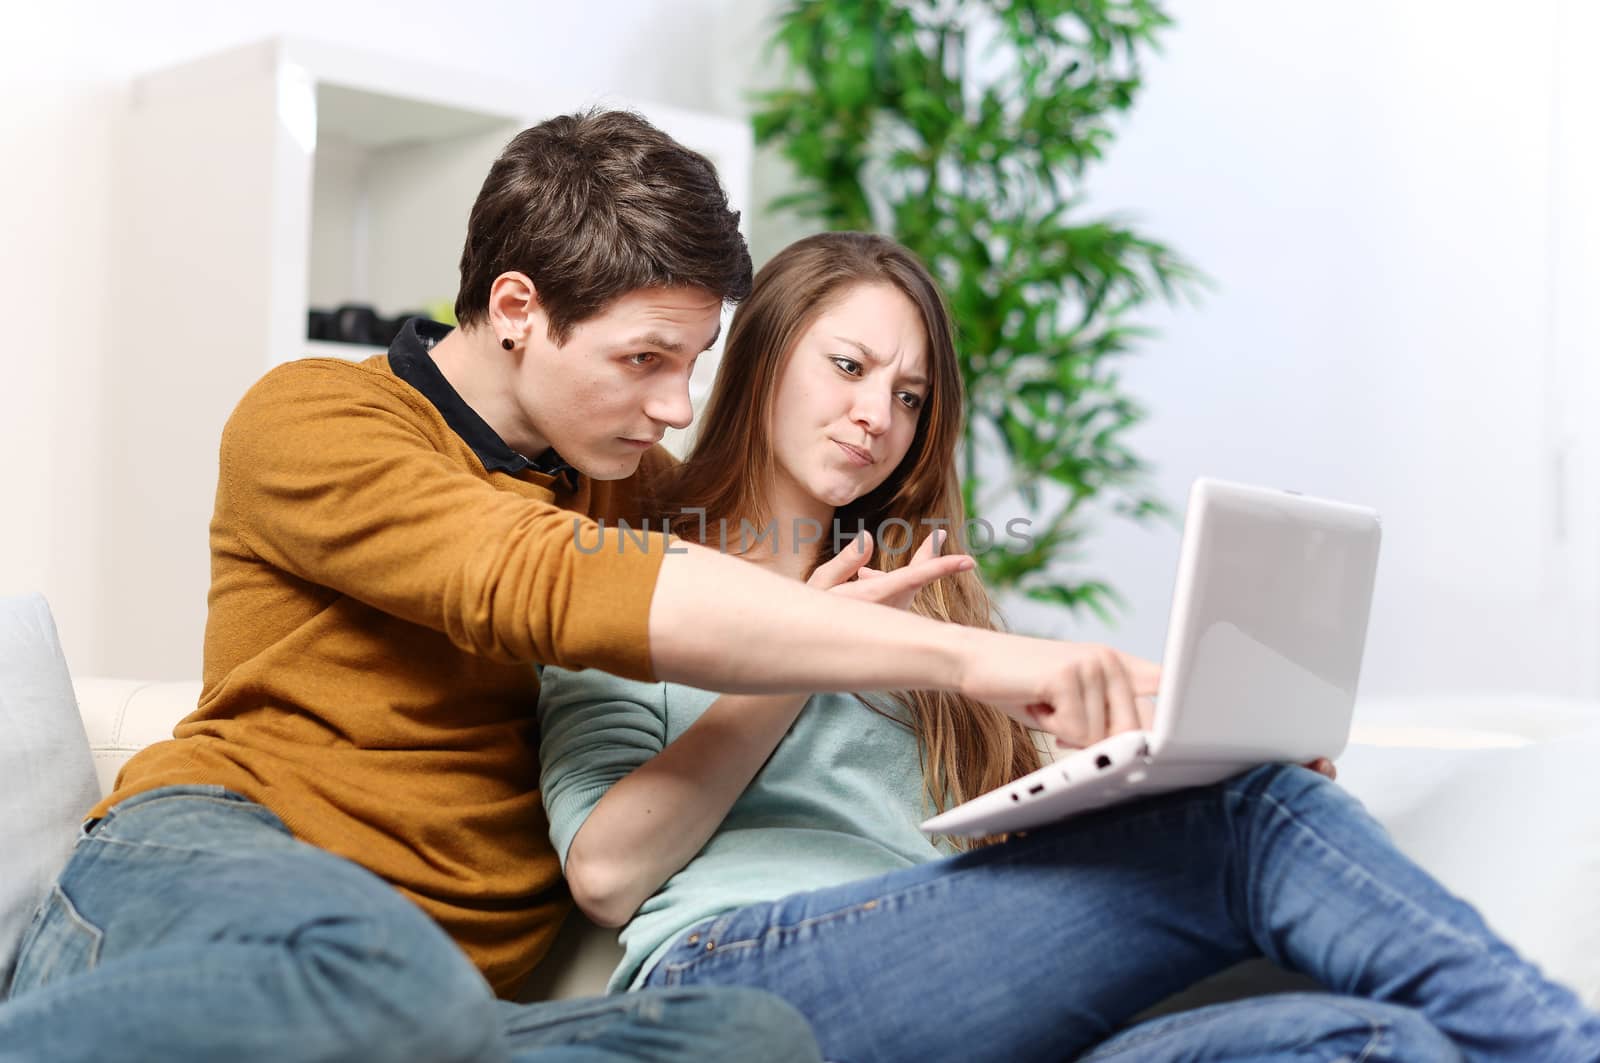 Couple of lovers uses a computer with a worried attitude by pixinoo